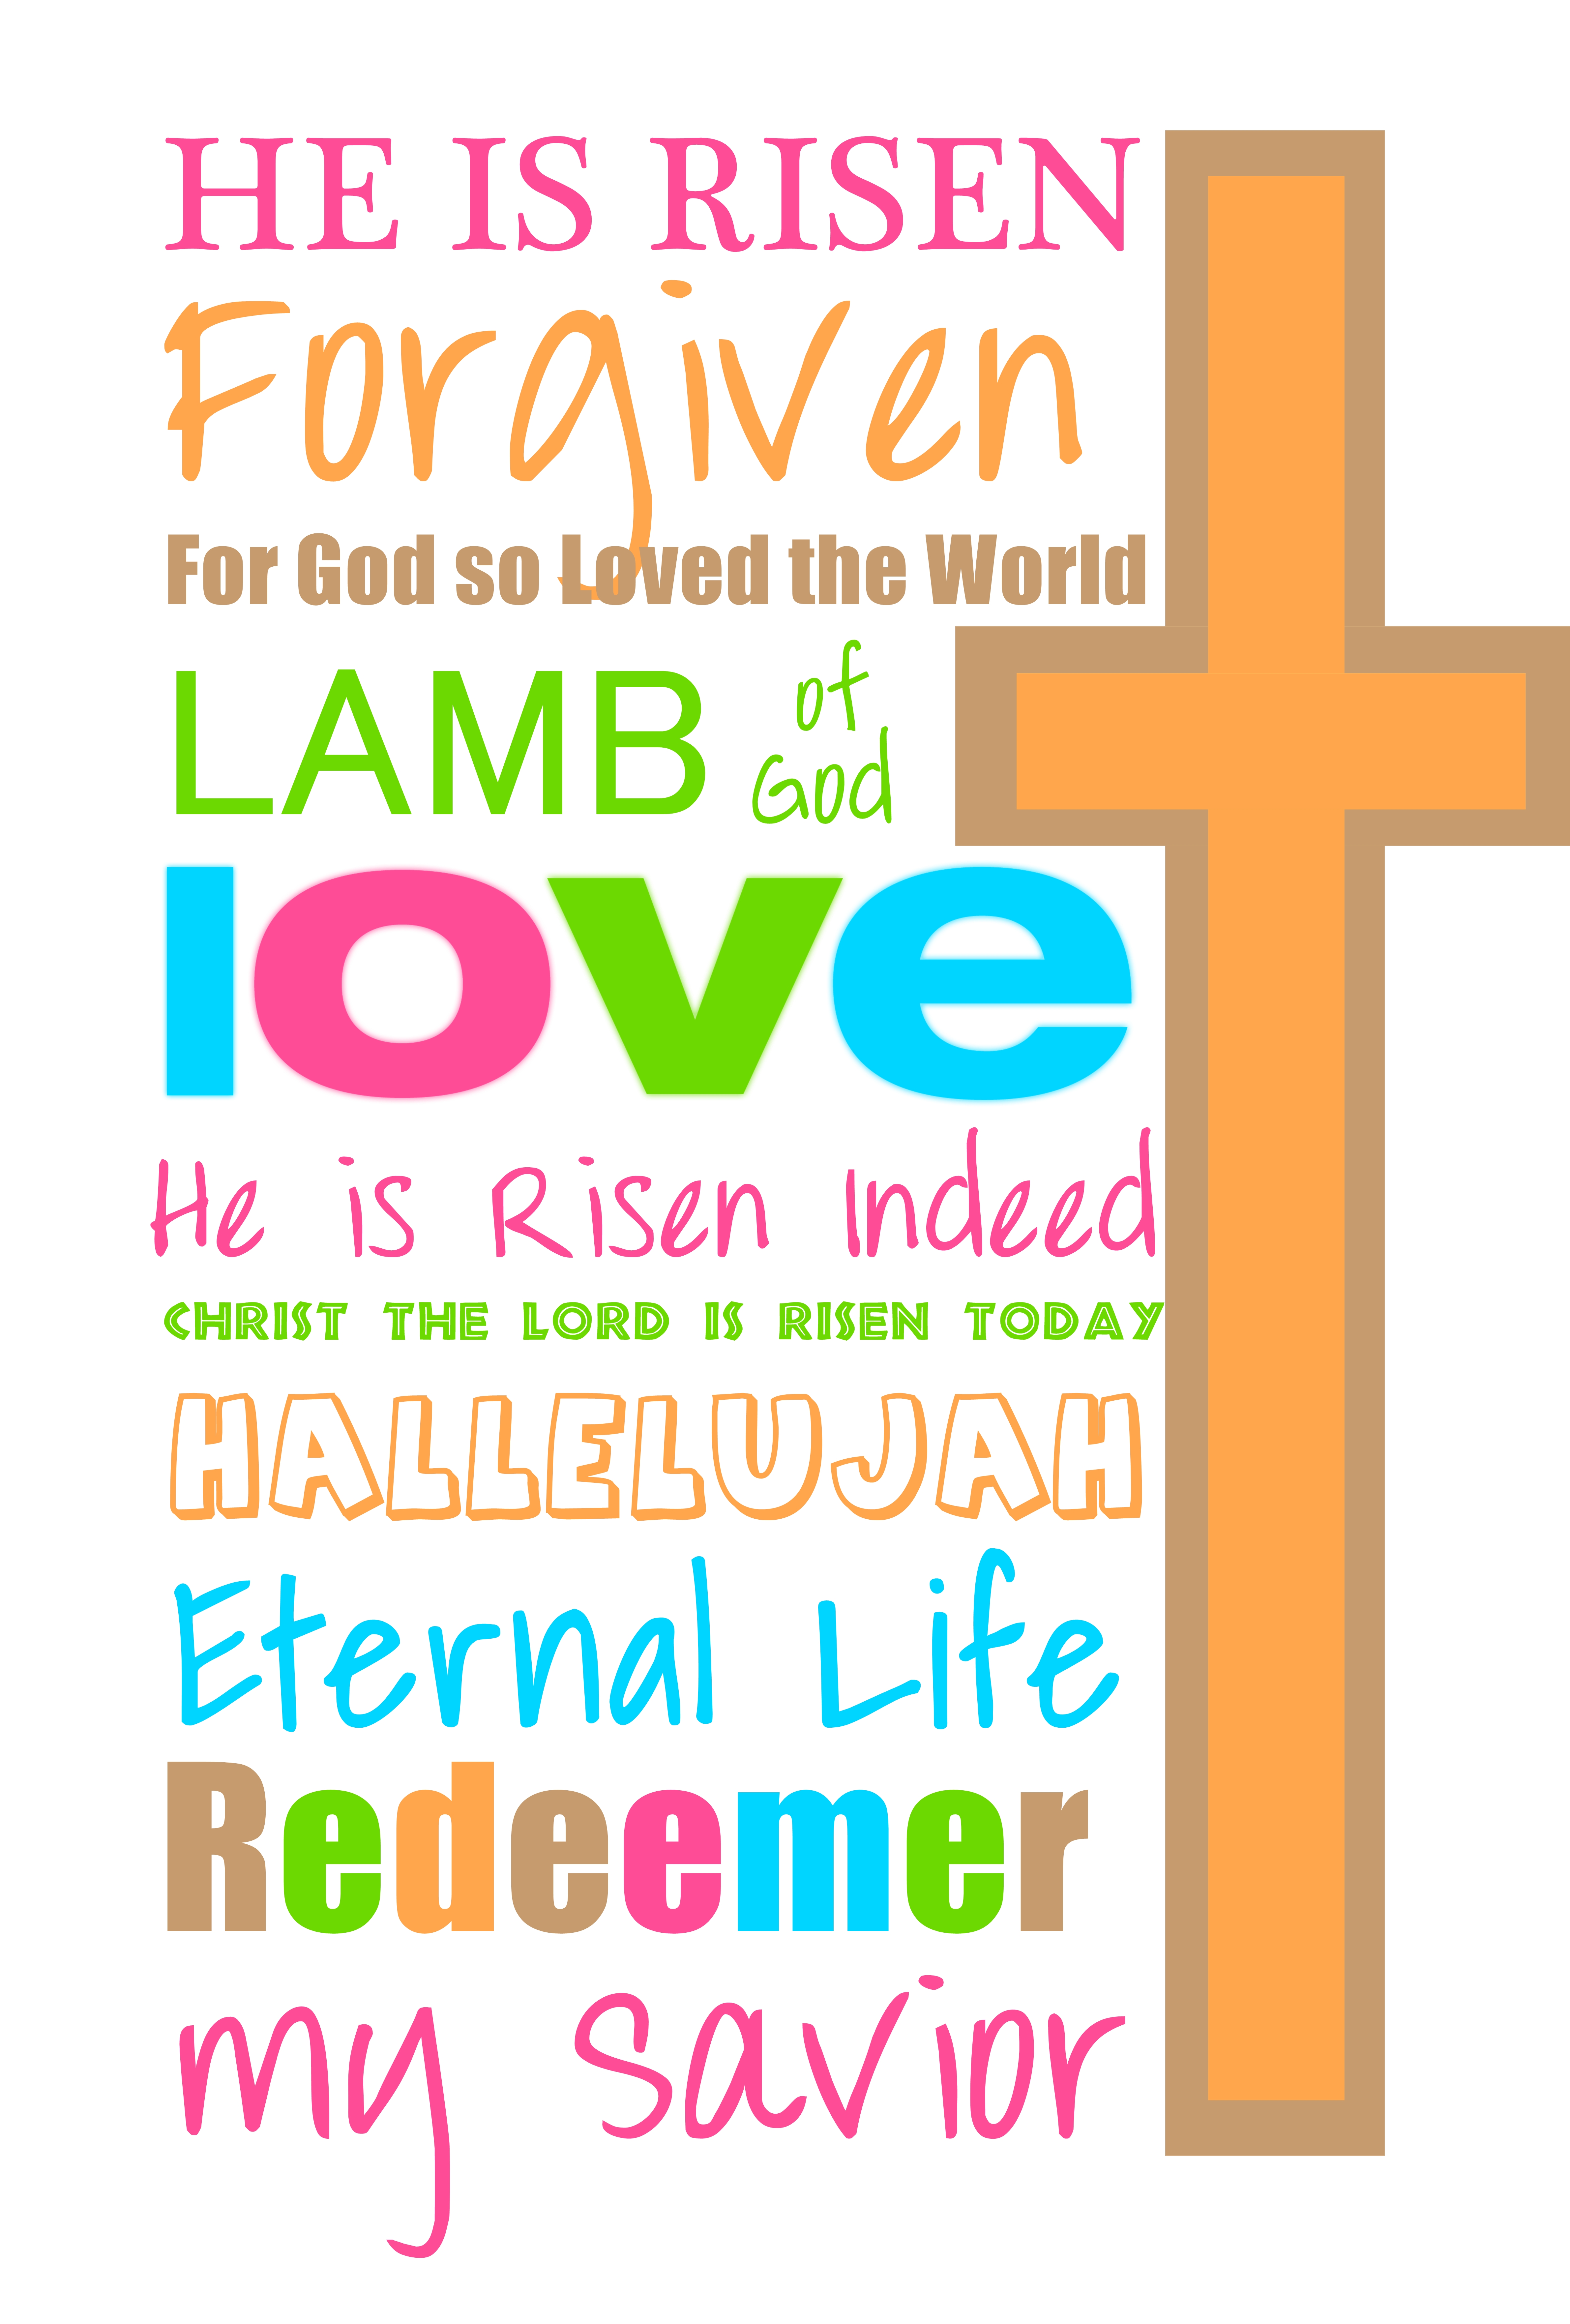 free easter religious clip art images - photo #37